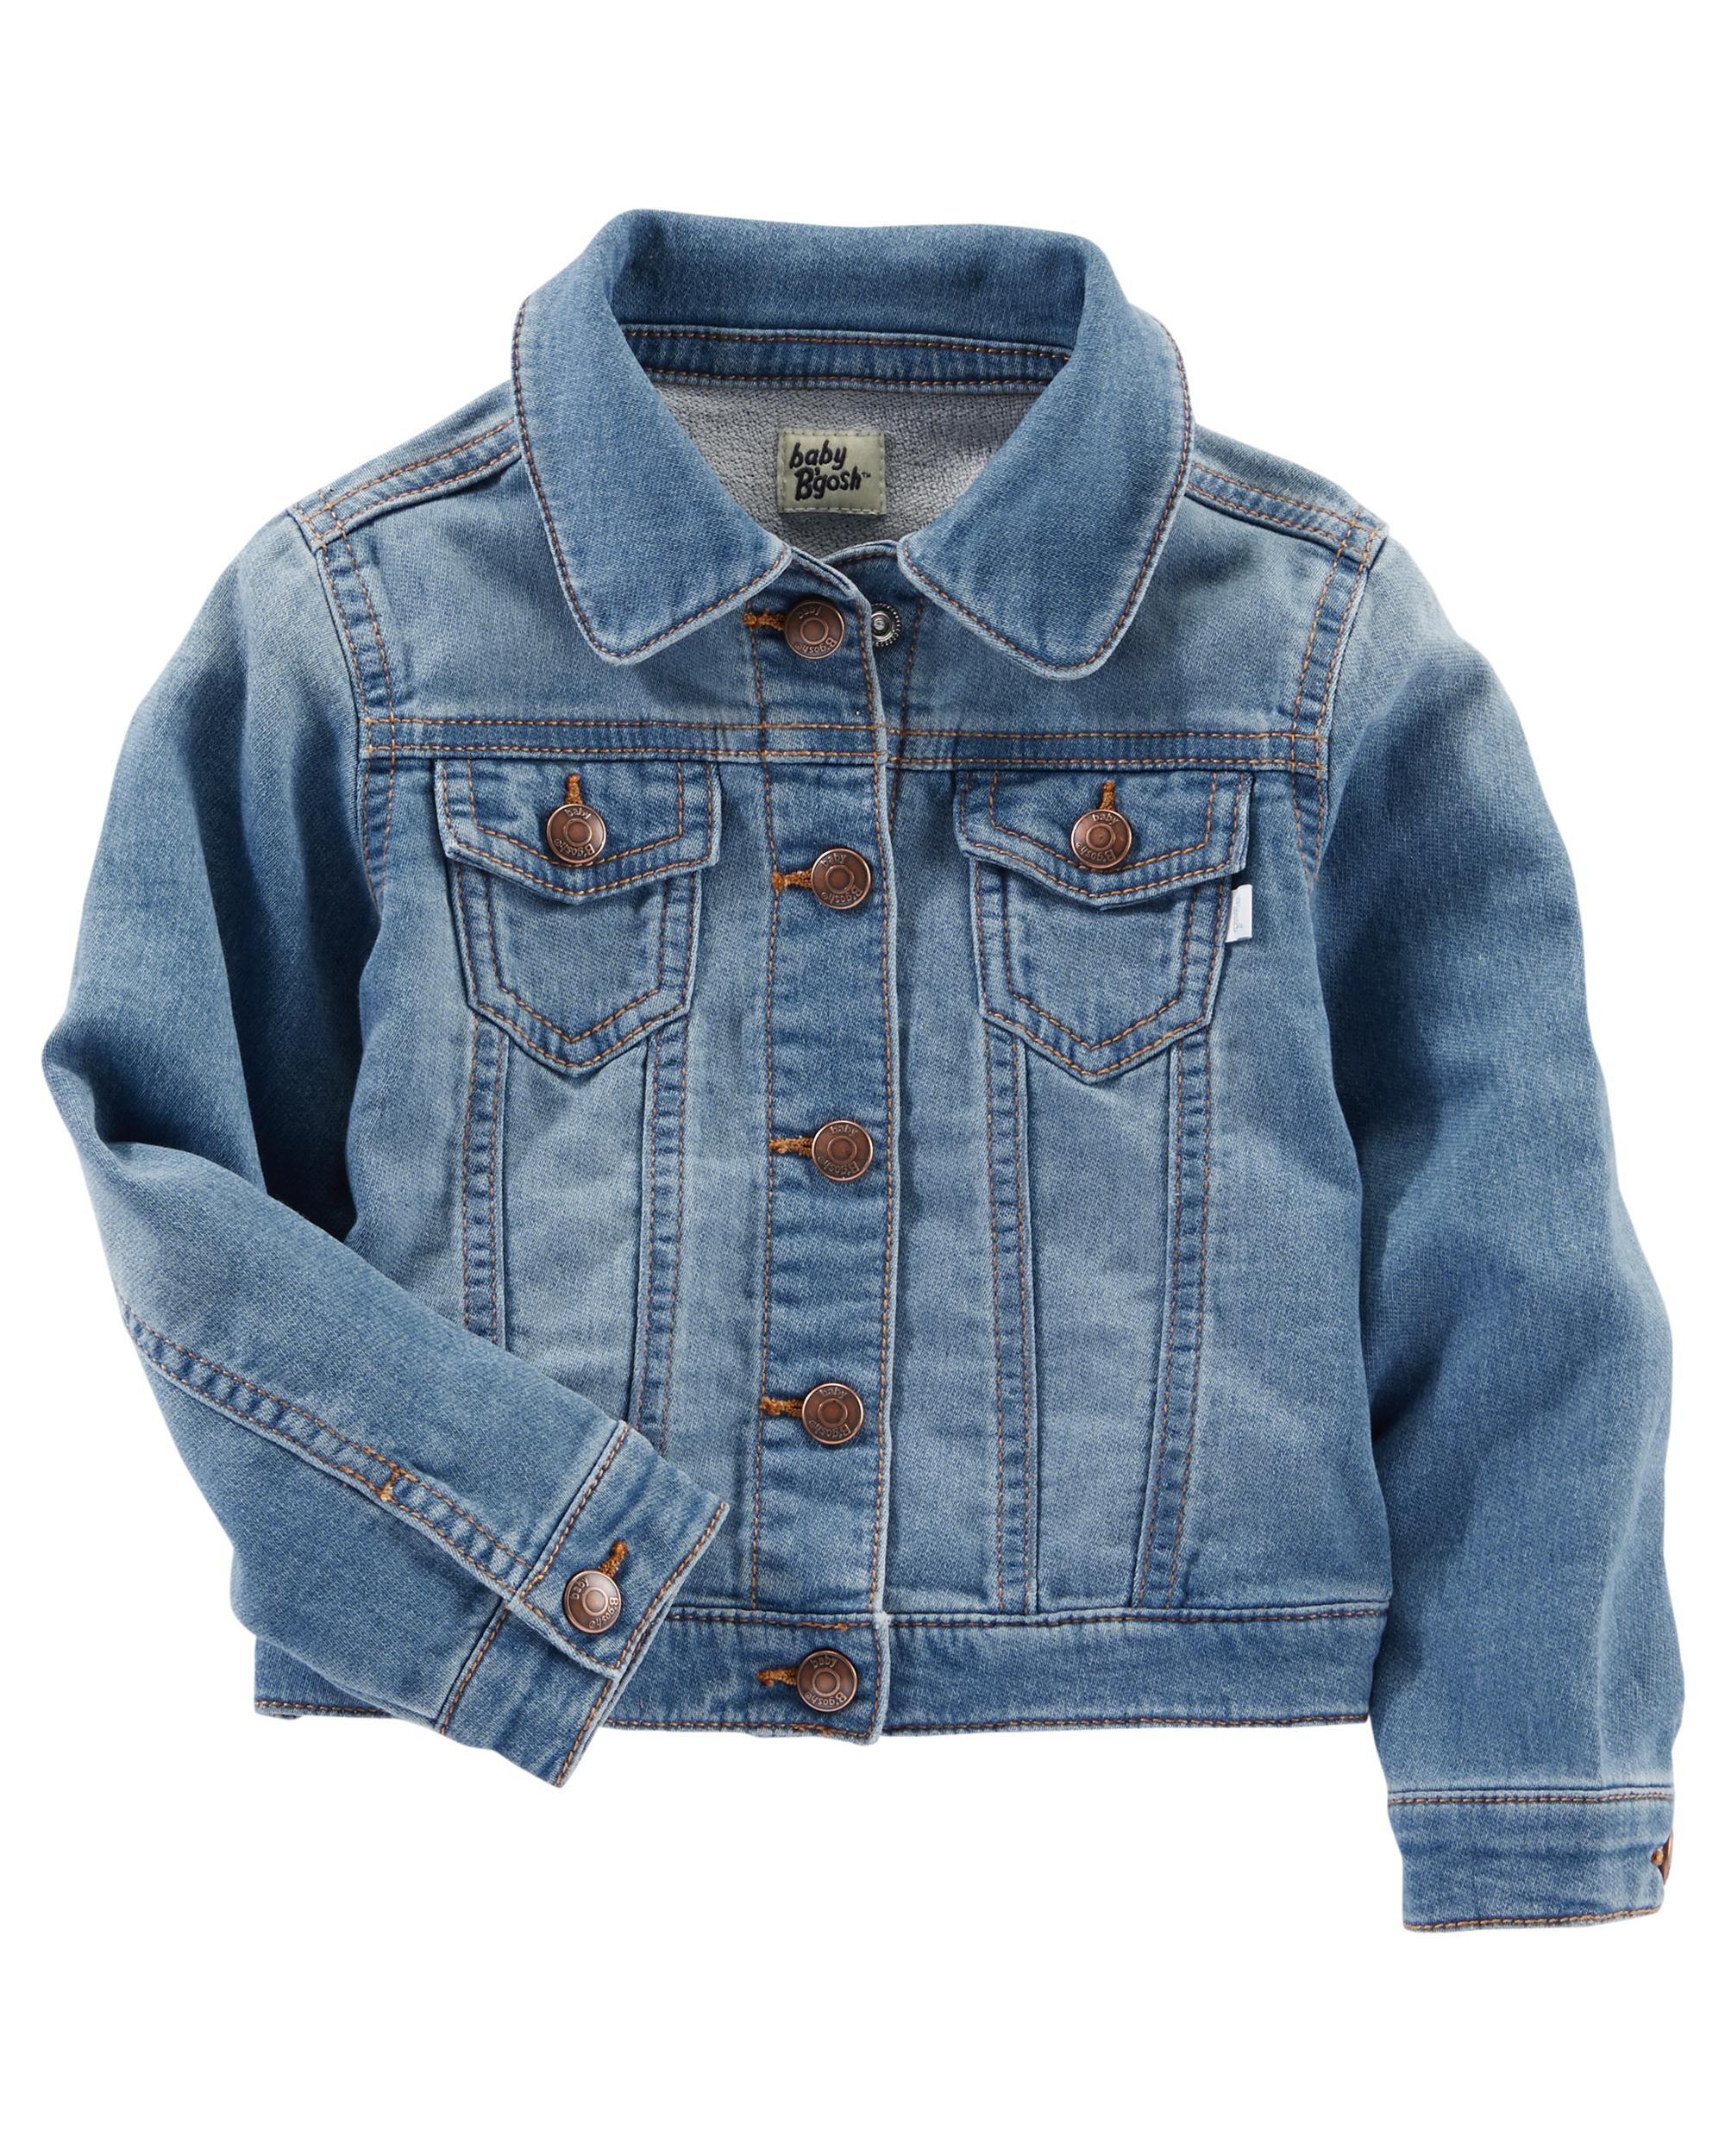 baby jeans jacket